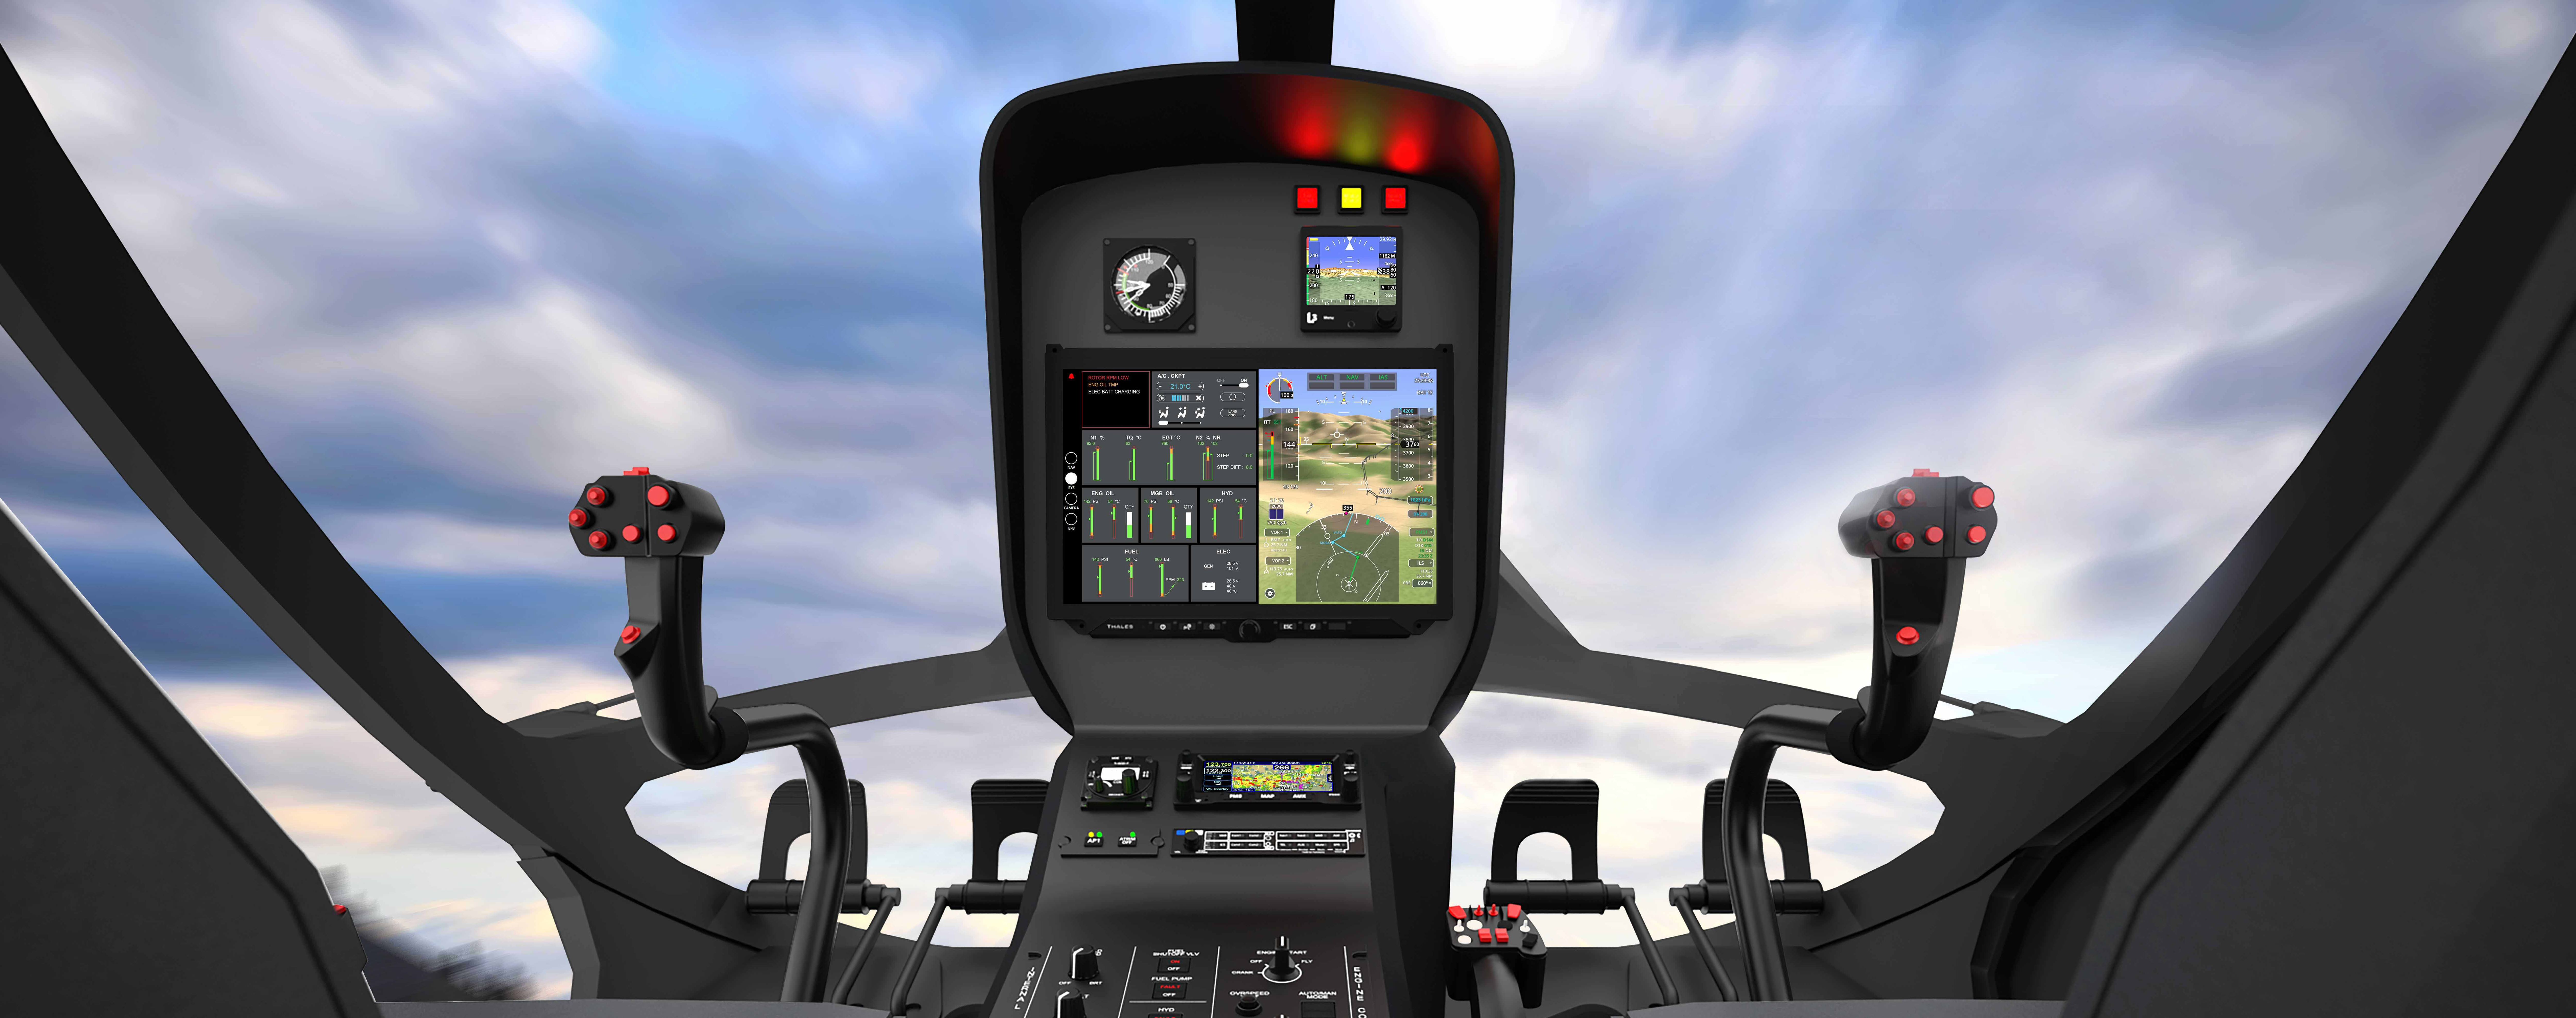 FlytX new generation avionics suite for helicopter connected cockpits